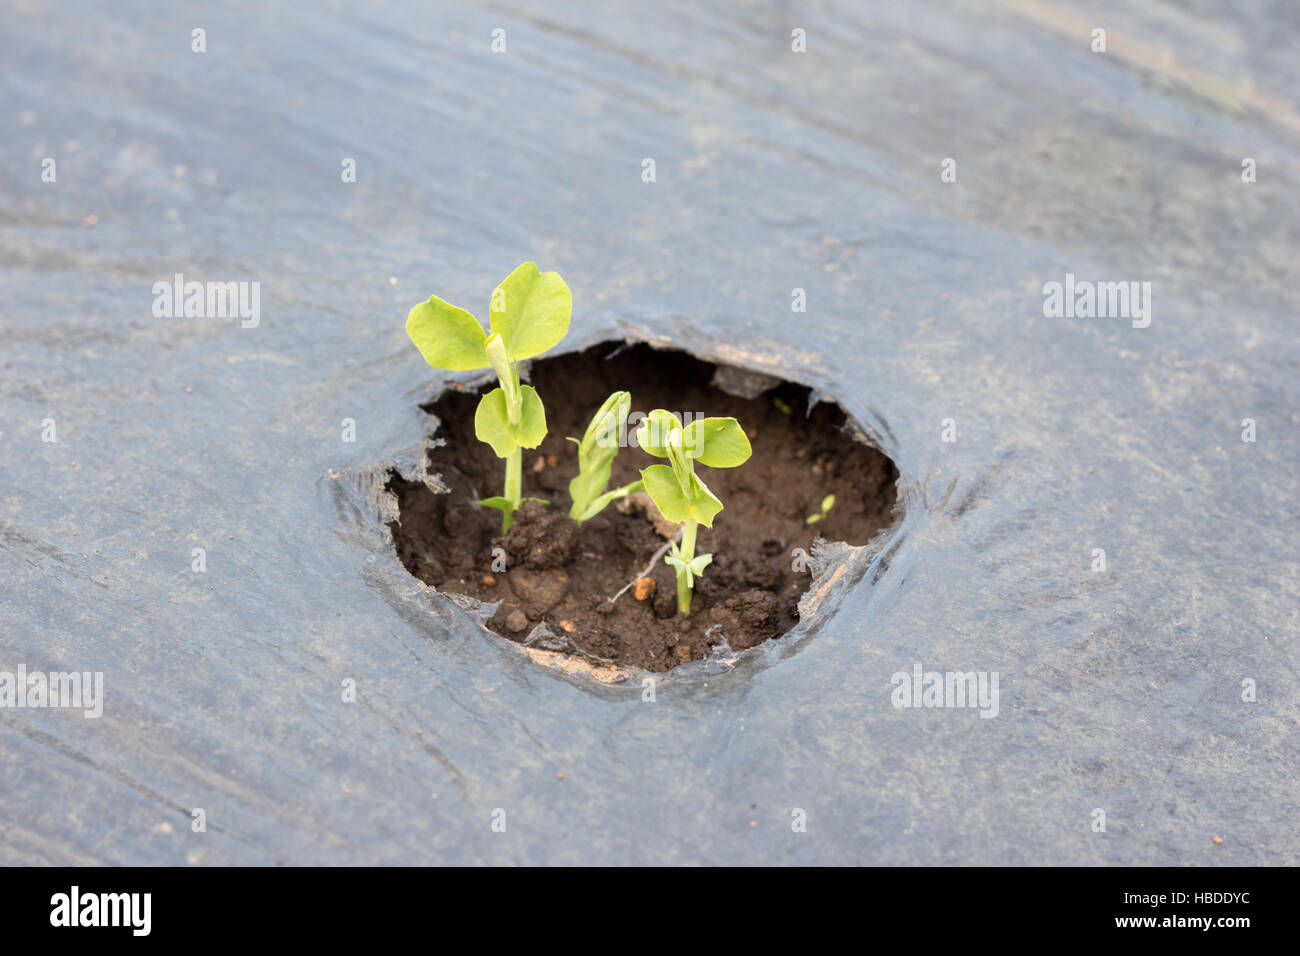 Growing vegetables on farm, young sprout of snap beans Stock Photo